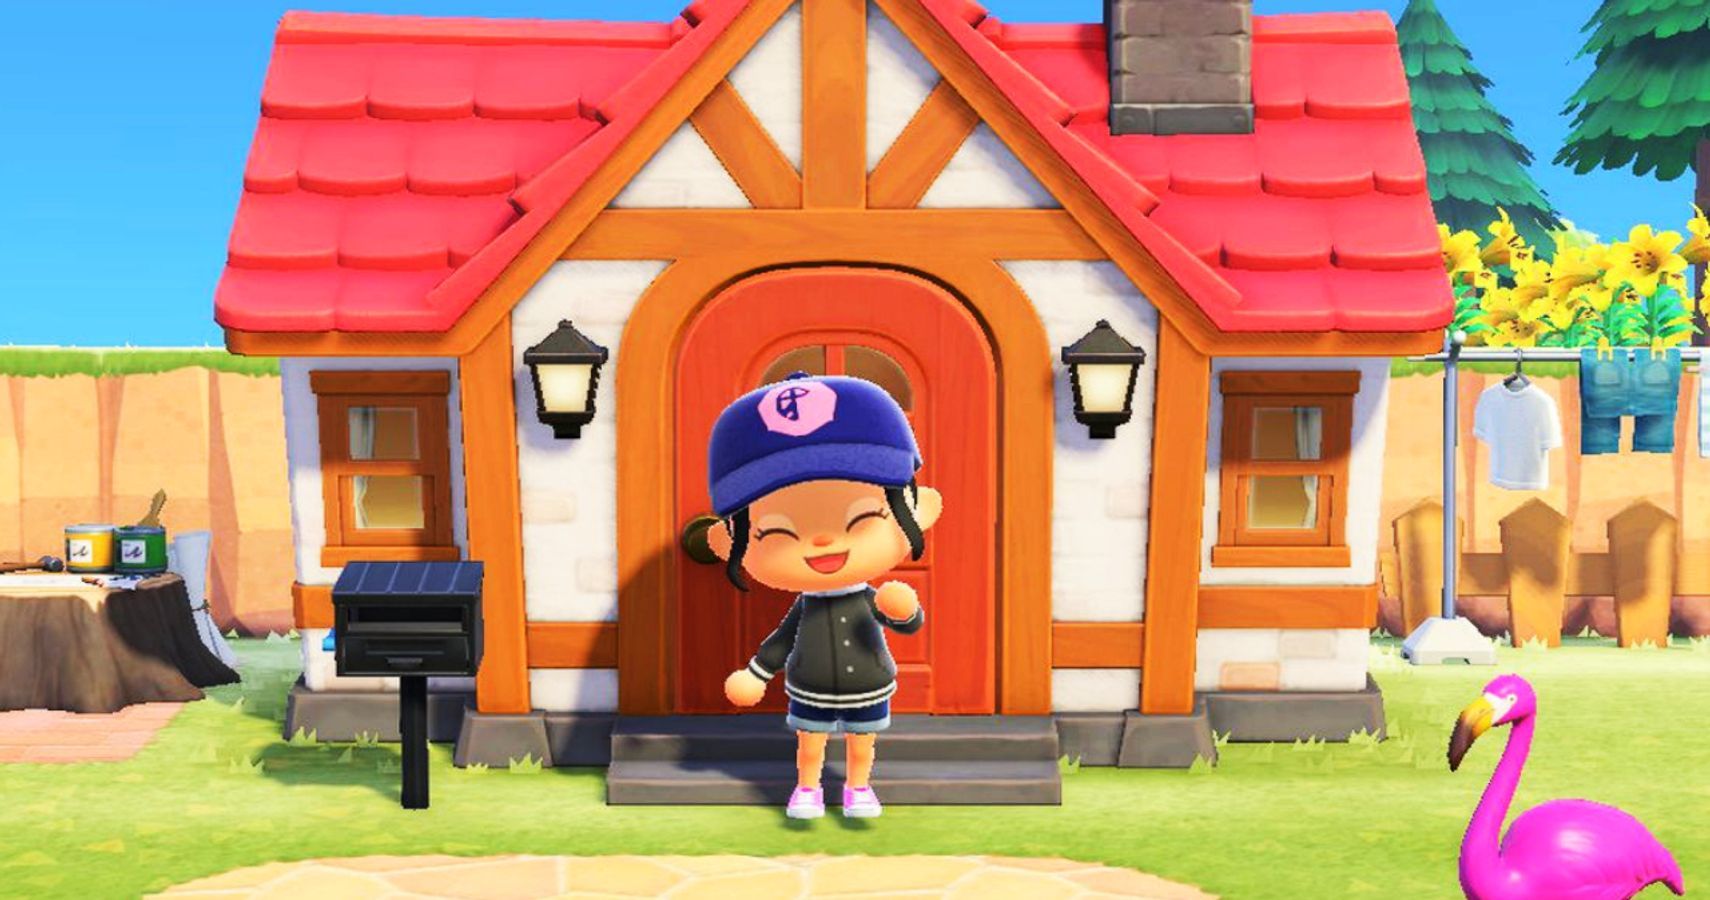 Animal Crossing: New Horizons - 10 Of The Most Creative Houses So Far